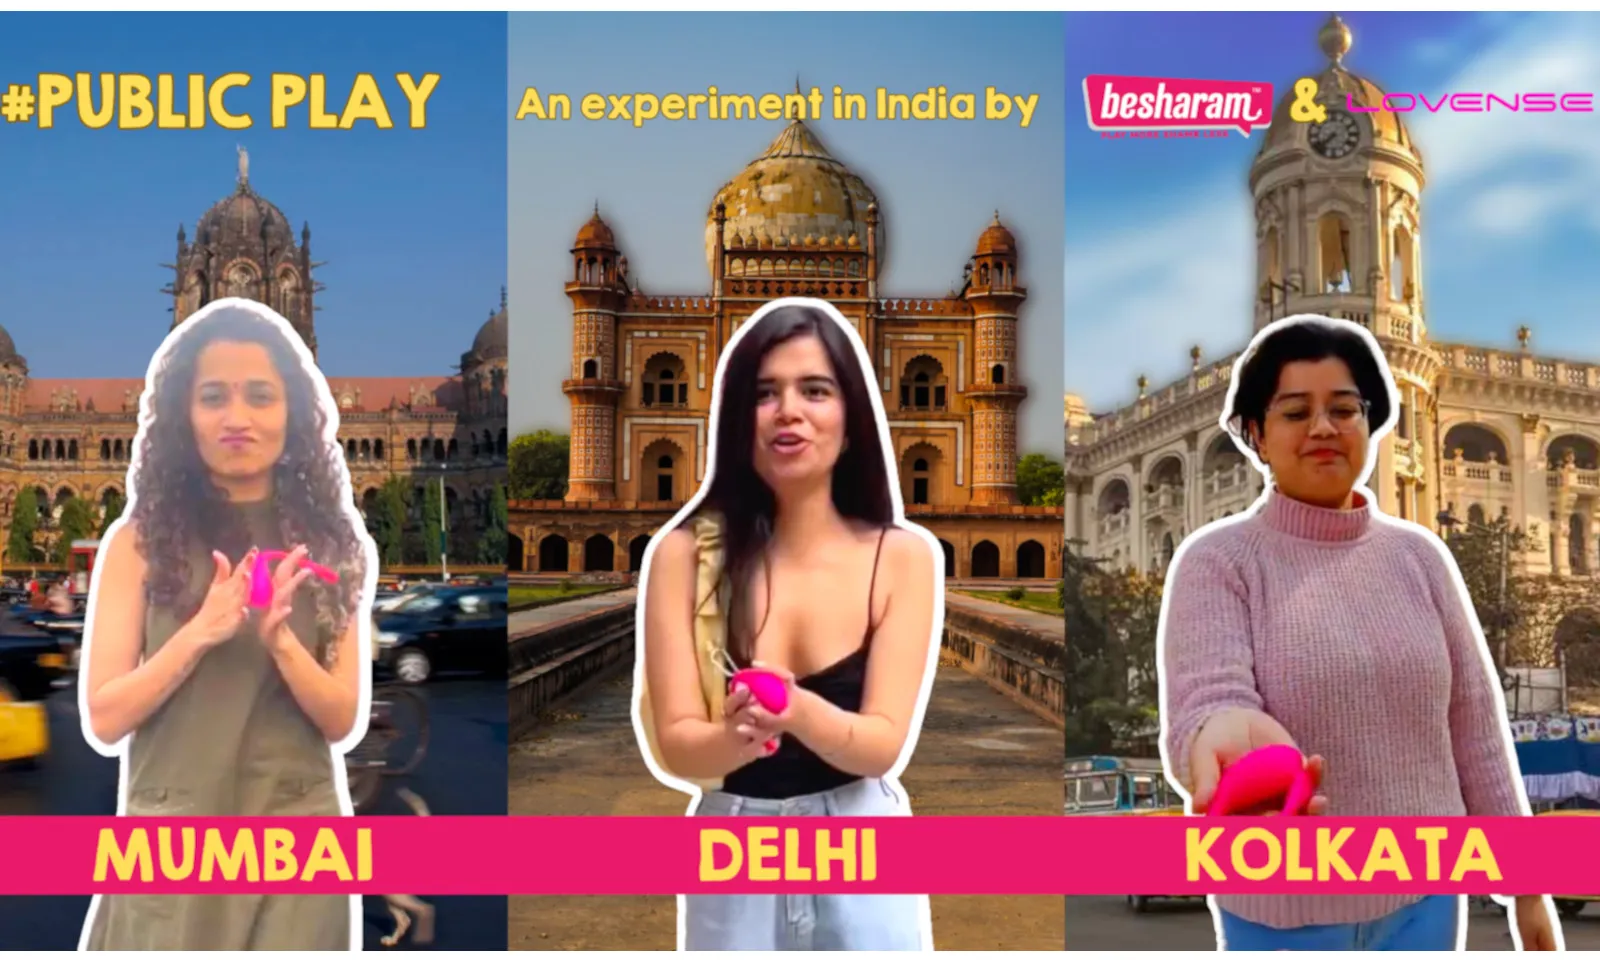 IMbesharam Stages 'Public Play Challenge' With Lovense Lush